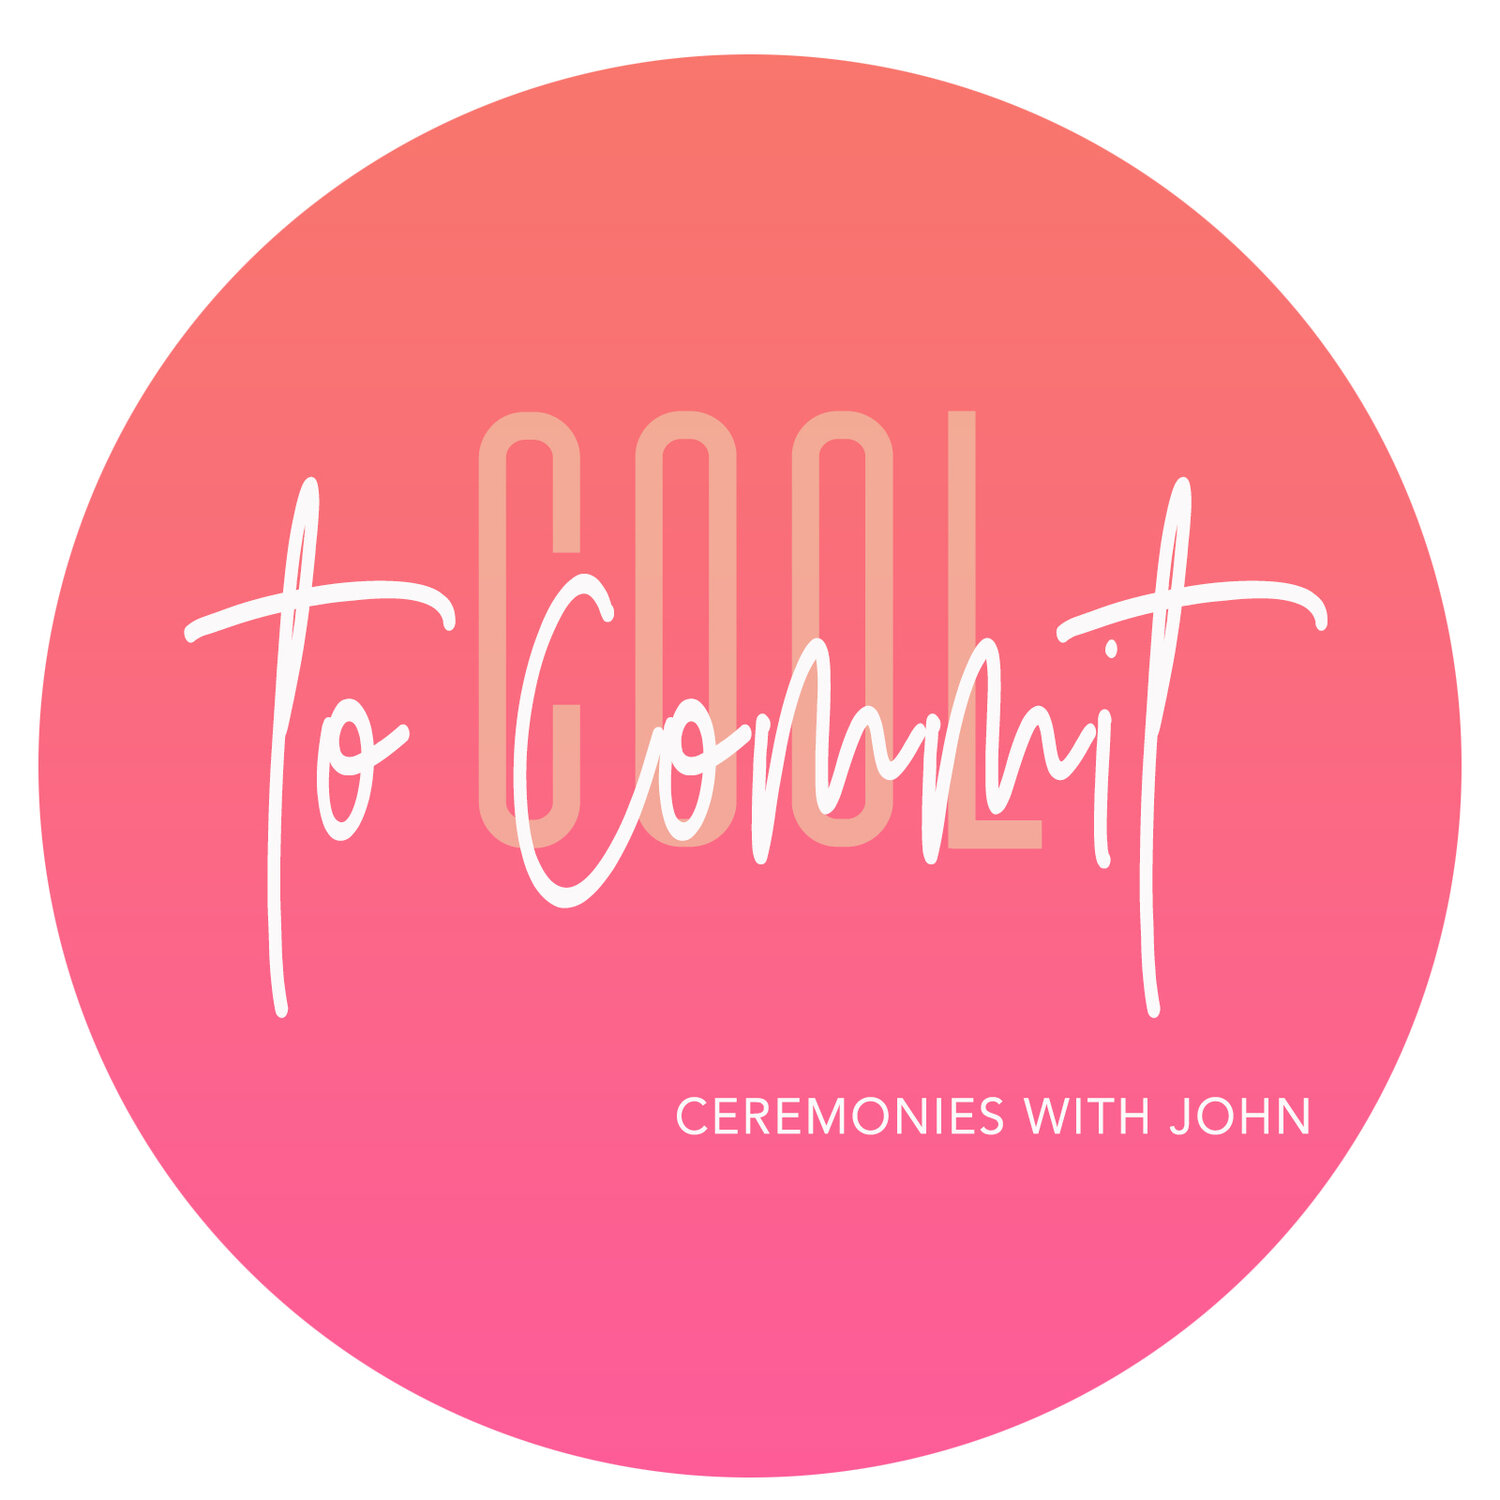 Cool To Commit Ceremonies with John